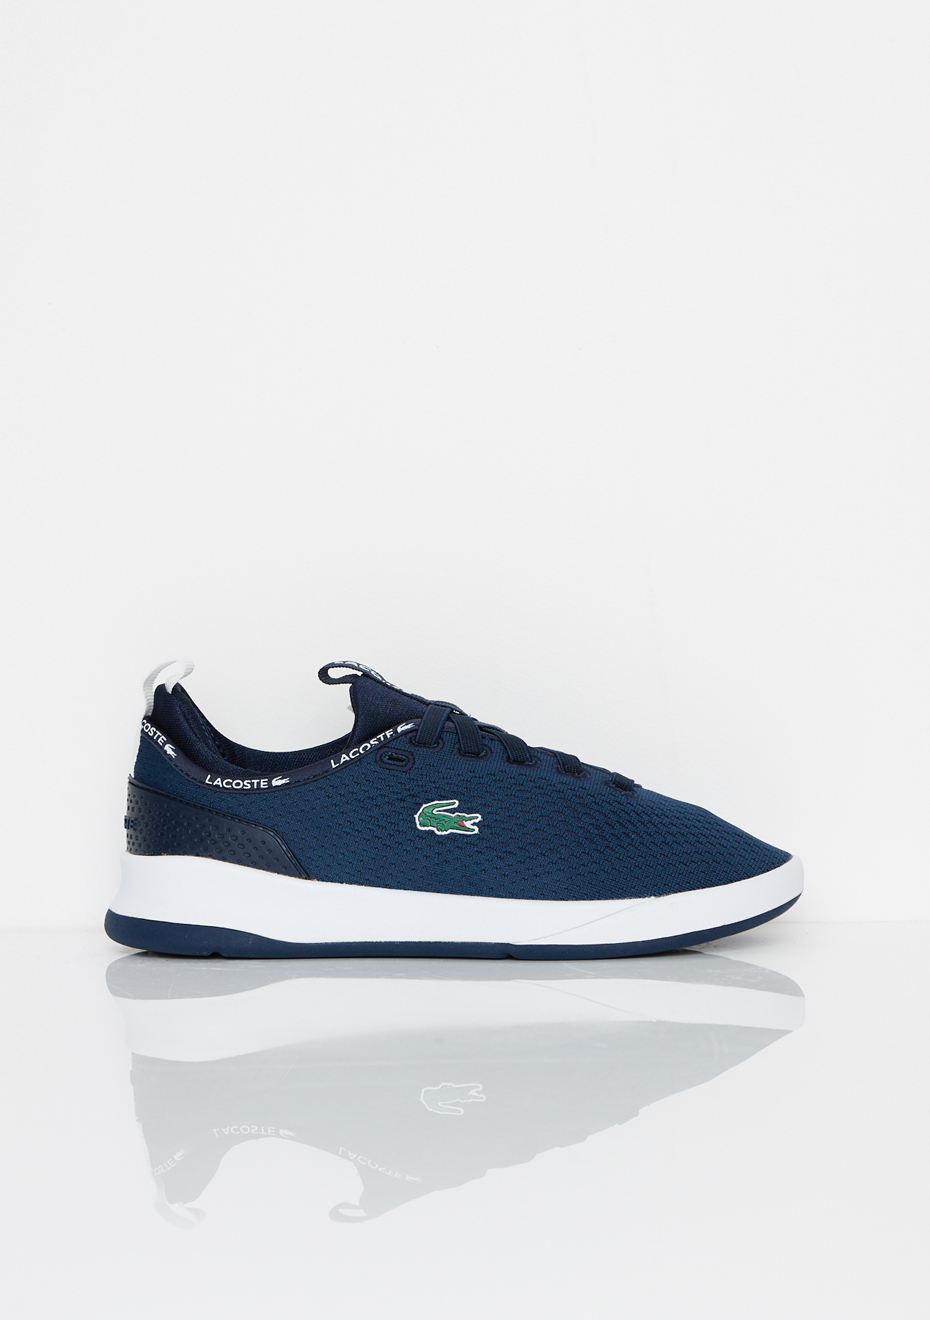 lacoste shoes for sale